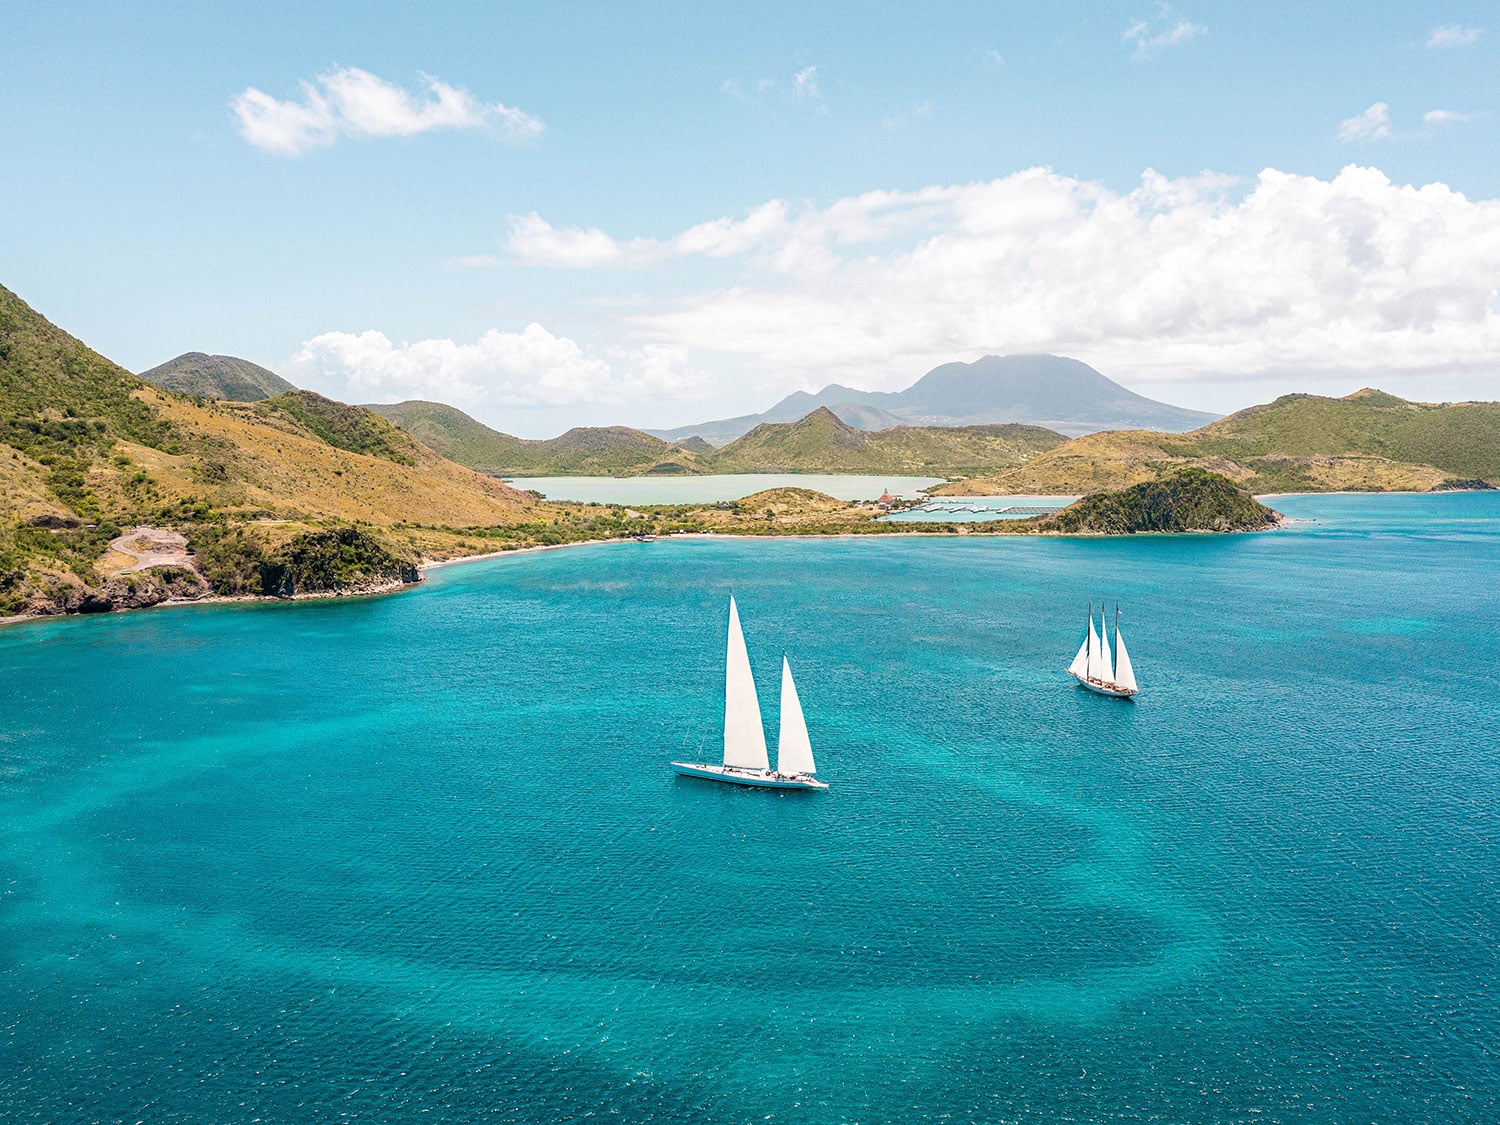 An aerial view of two boats in a bay in St. Kitts, surrounded by the island’s many hills.